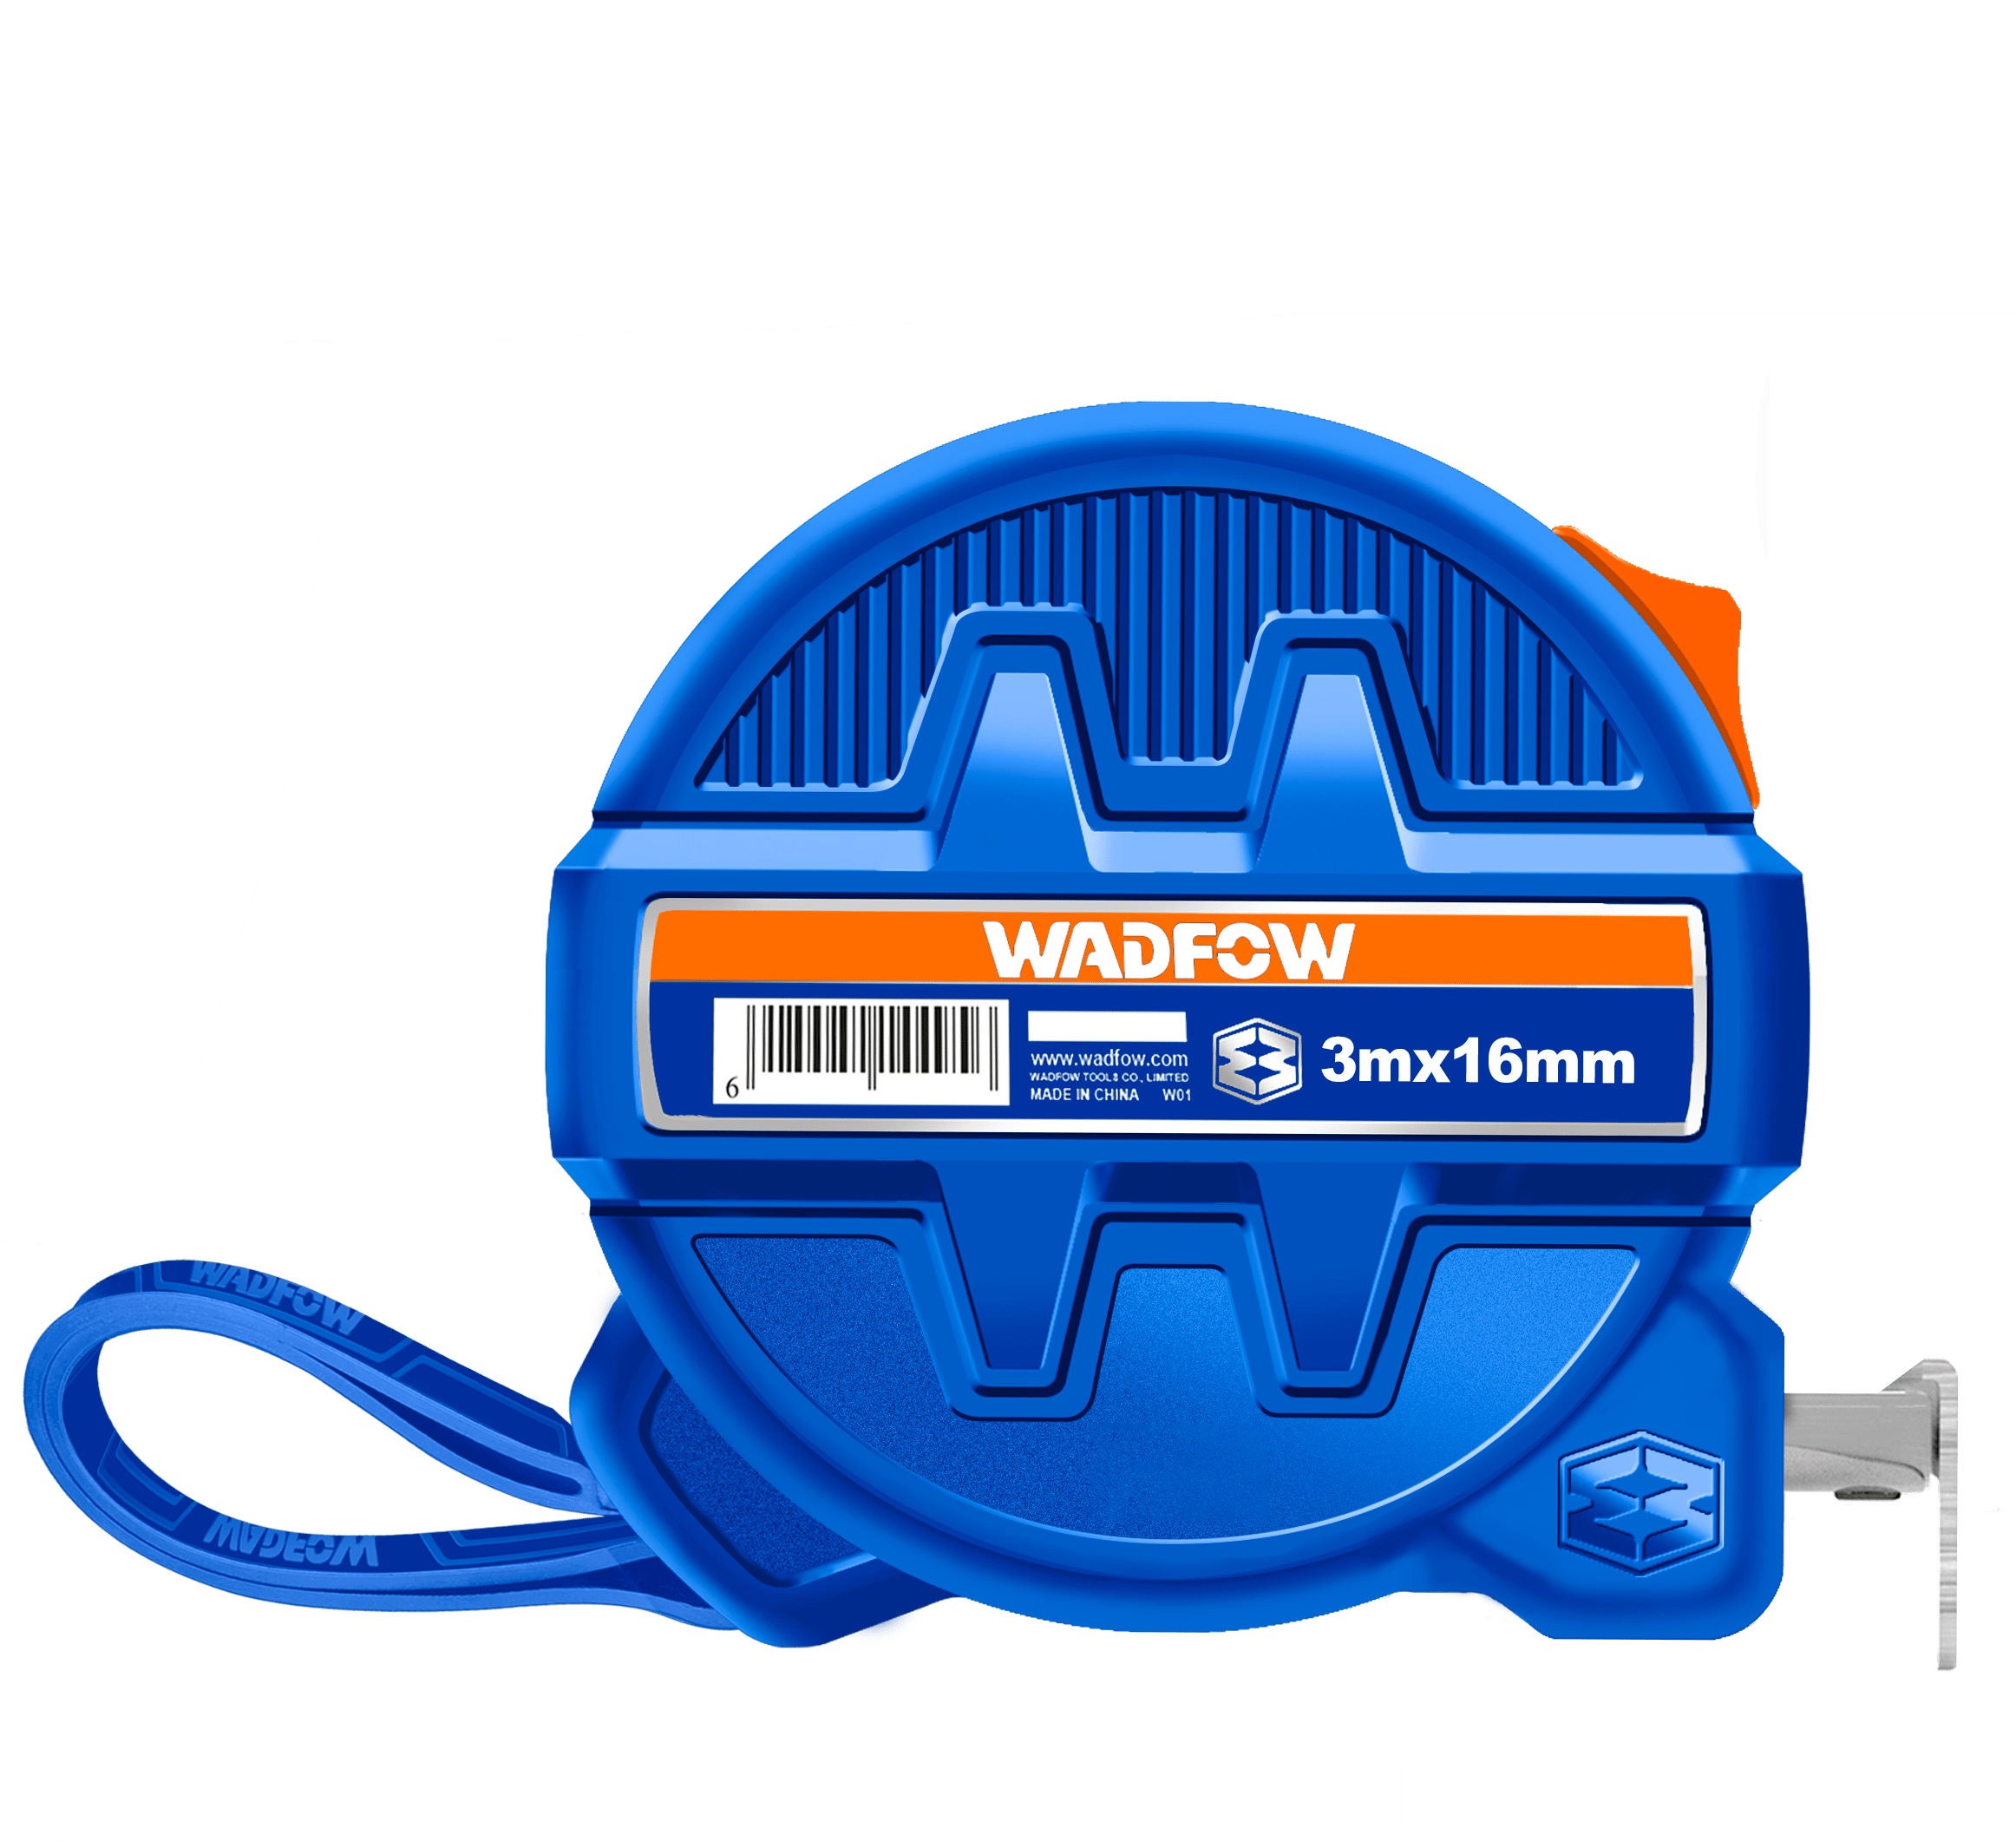 Buy Wadfow Steel Measuring Tape in Accra, Ghana | Supply Master Tape Measure Buy Tools hardware Building materials